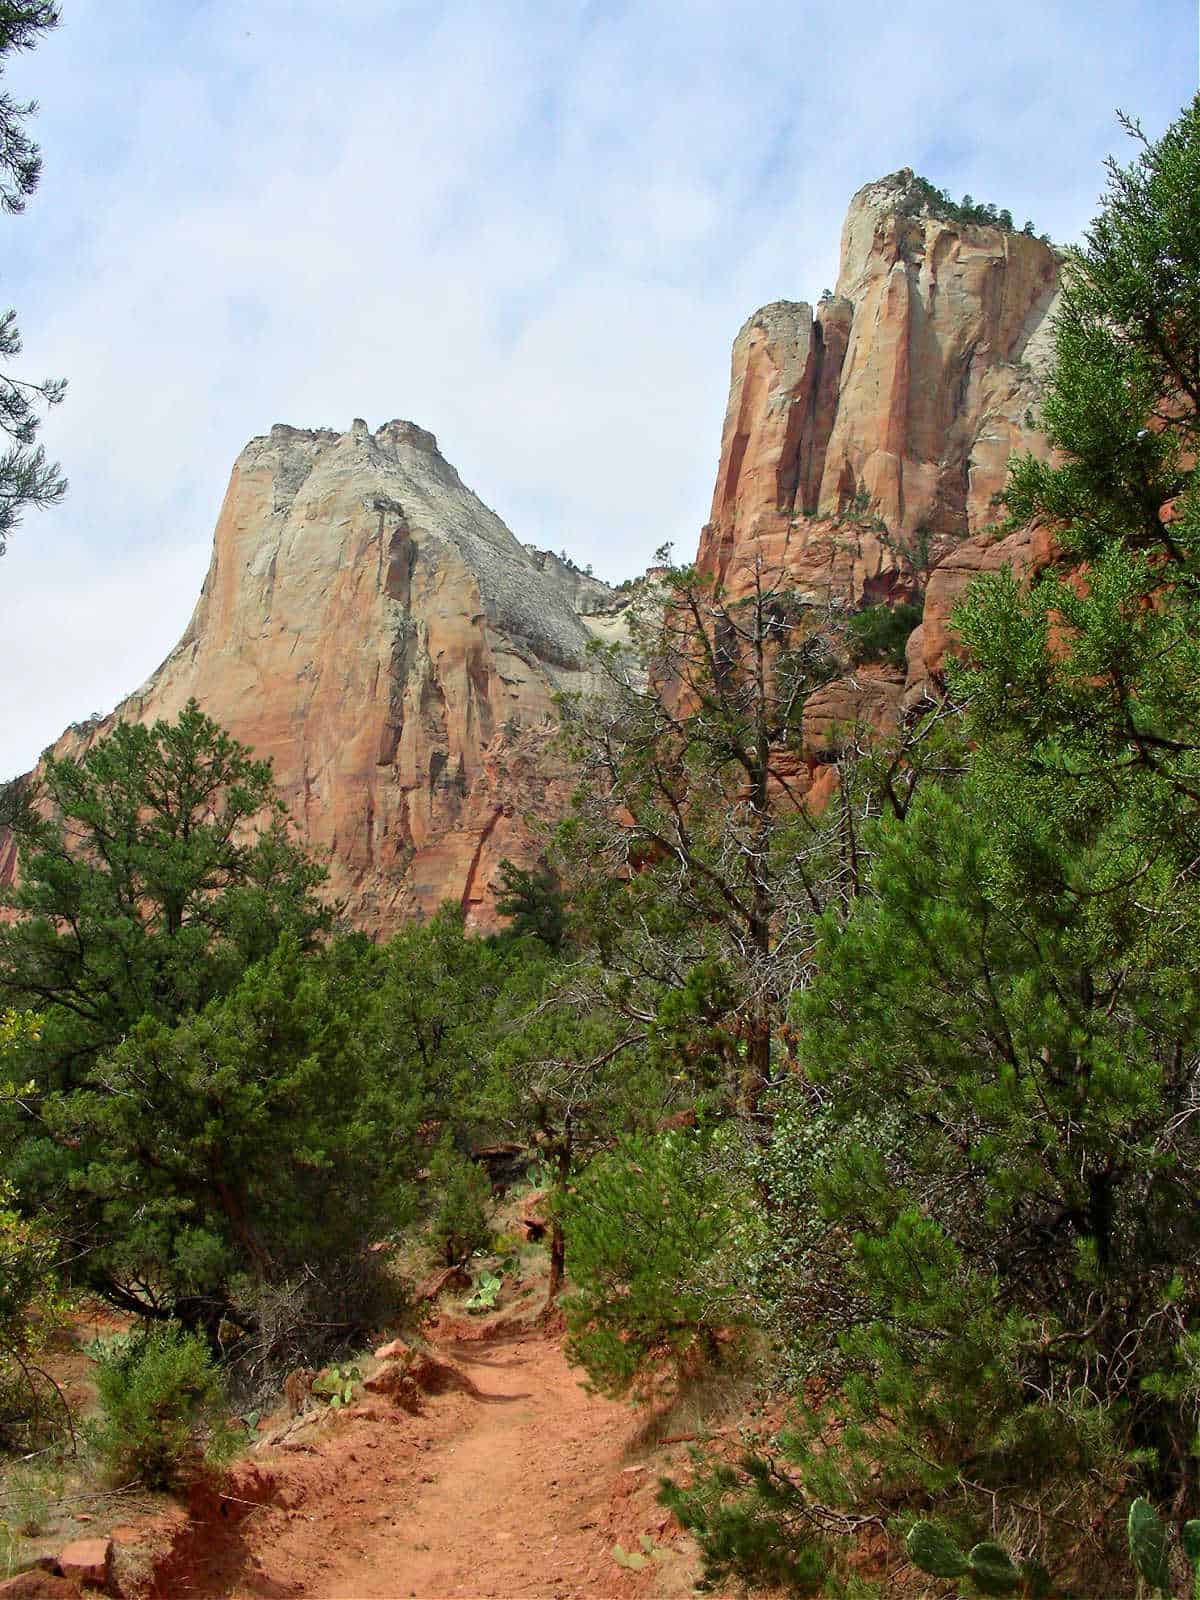 Beautiful view of the Court of the Patriarchs along the Sand Bench Trail at Zion National Park